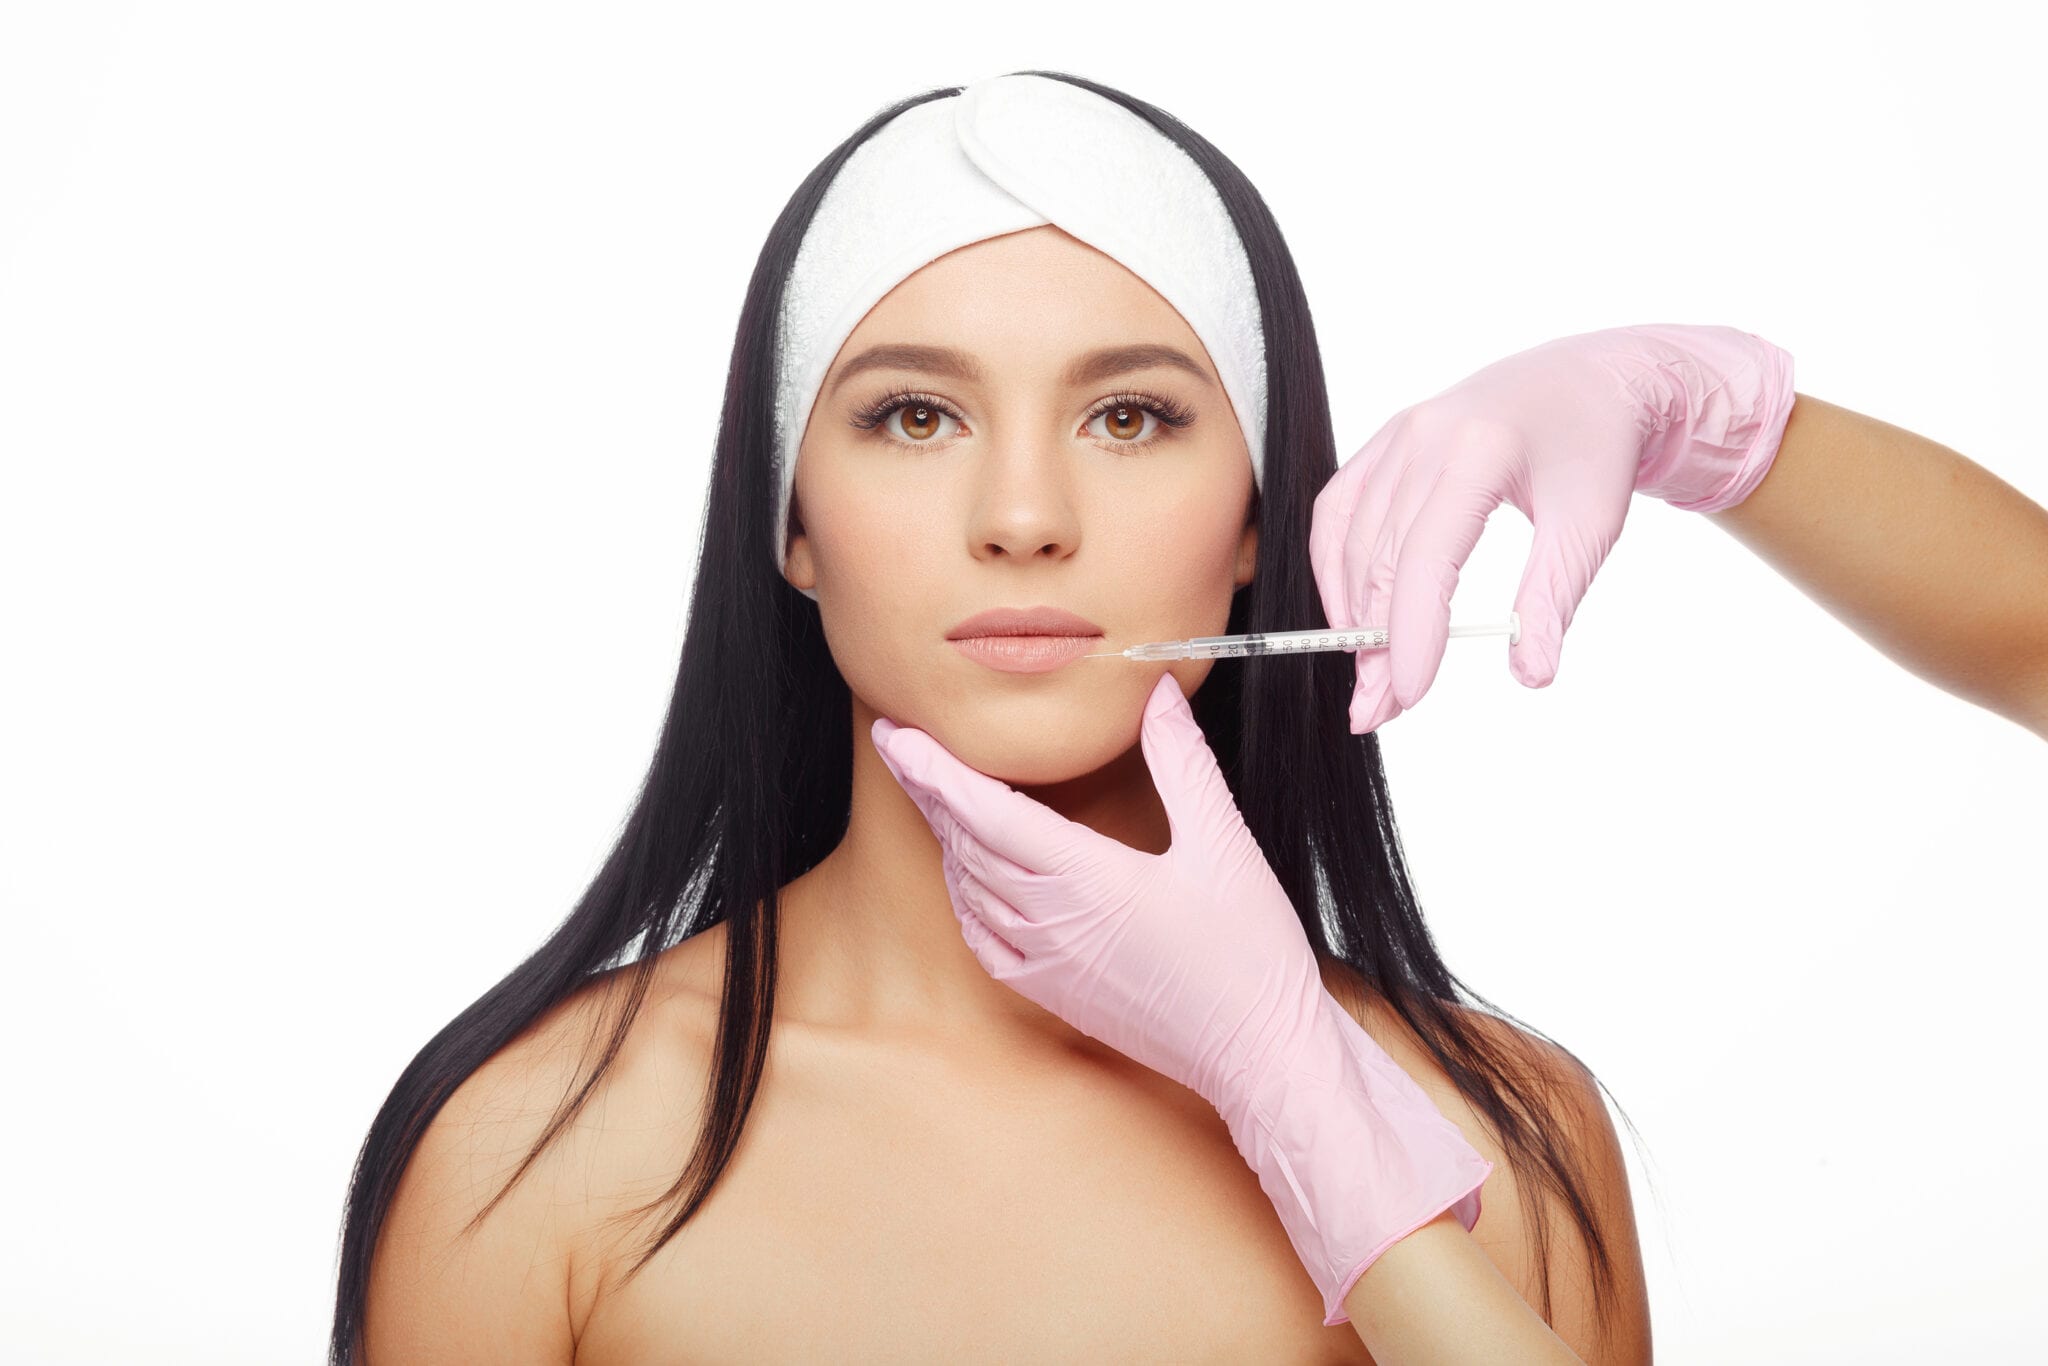 Brunette Receiving Lip Injection By Pink Gloved Hands